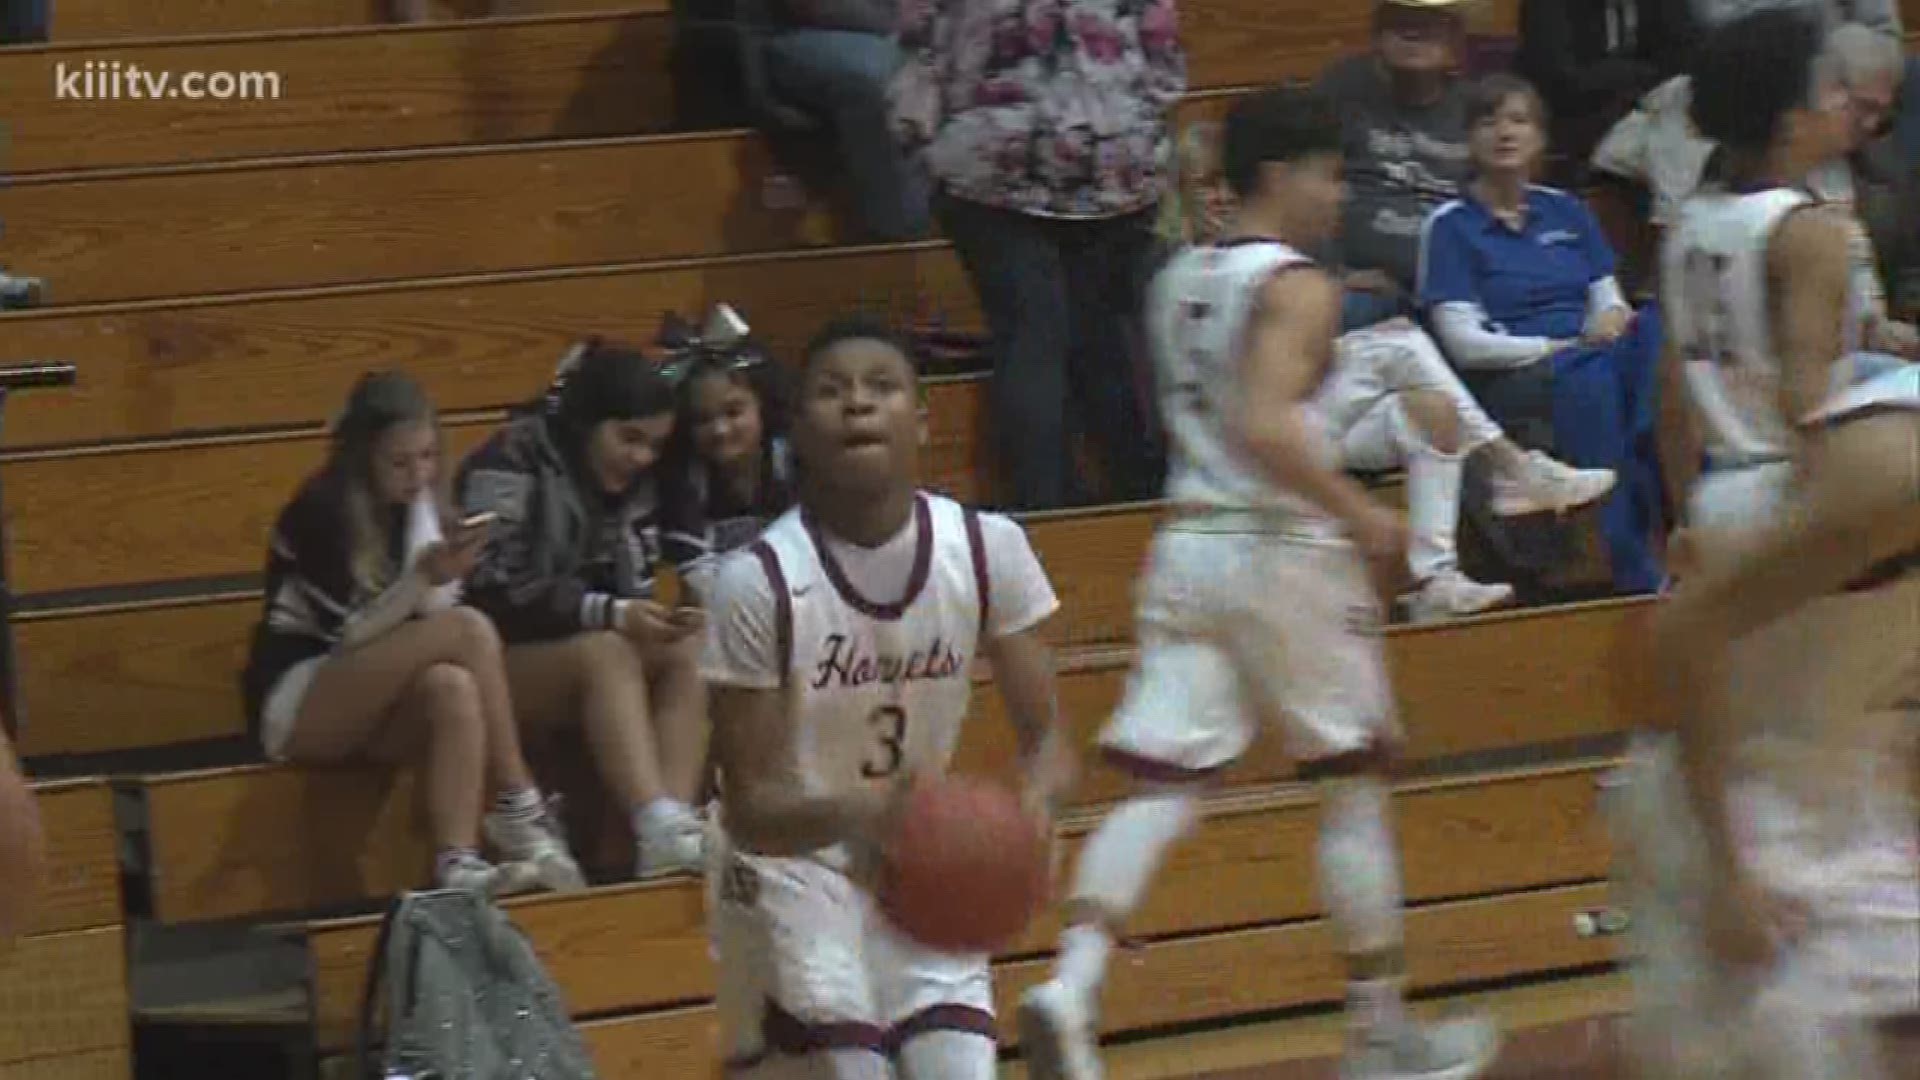 Highlights and scores from a handful of Tuesday night games!